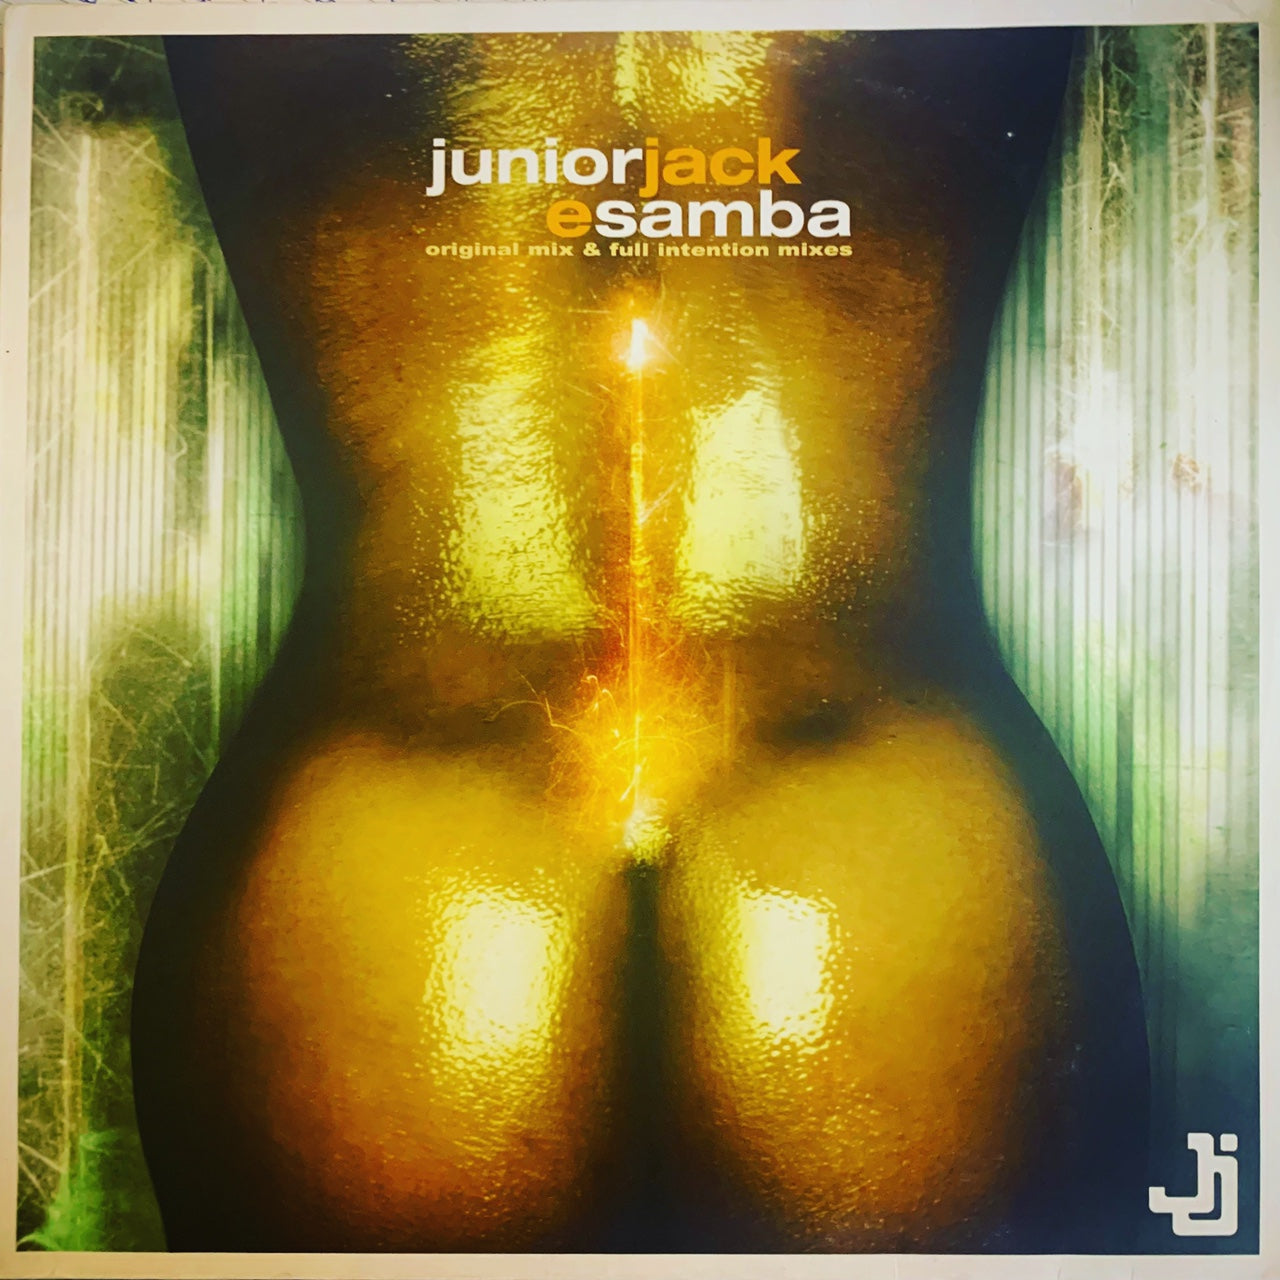 Junior Jack esamba 3 Version 12inch Vinyl Single full track listing in Photos Featuring Original and Full Intention Mixes on Defected Records